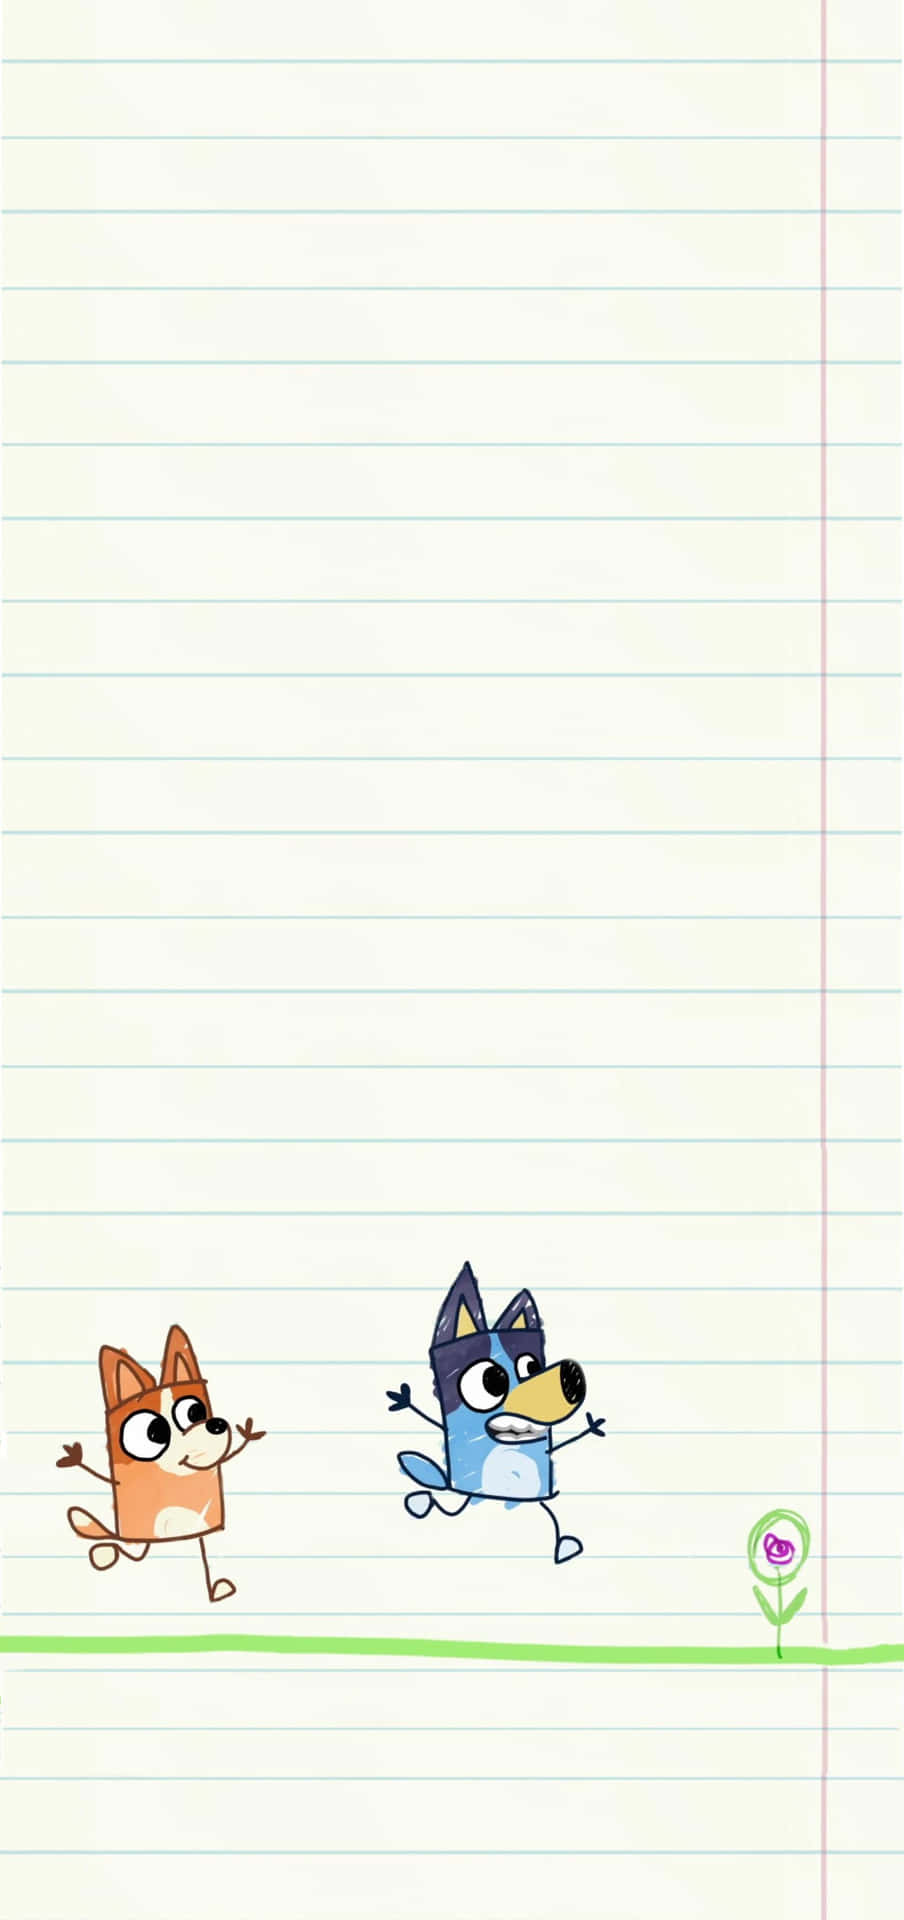 A Cartoon Drawing Of Two Dogs Running On A Lined Paper